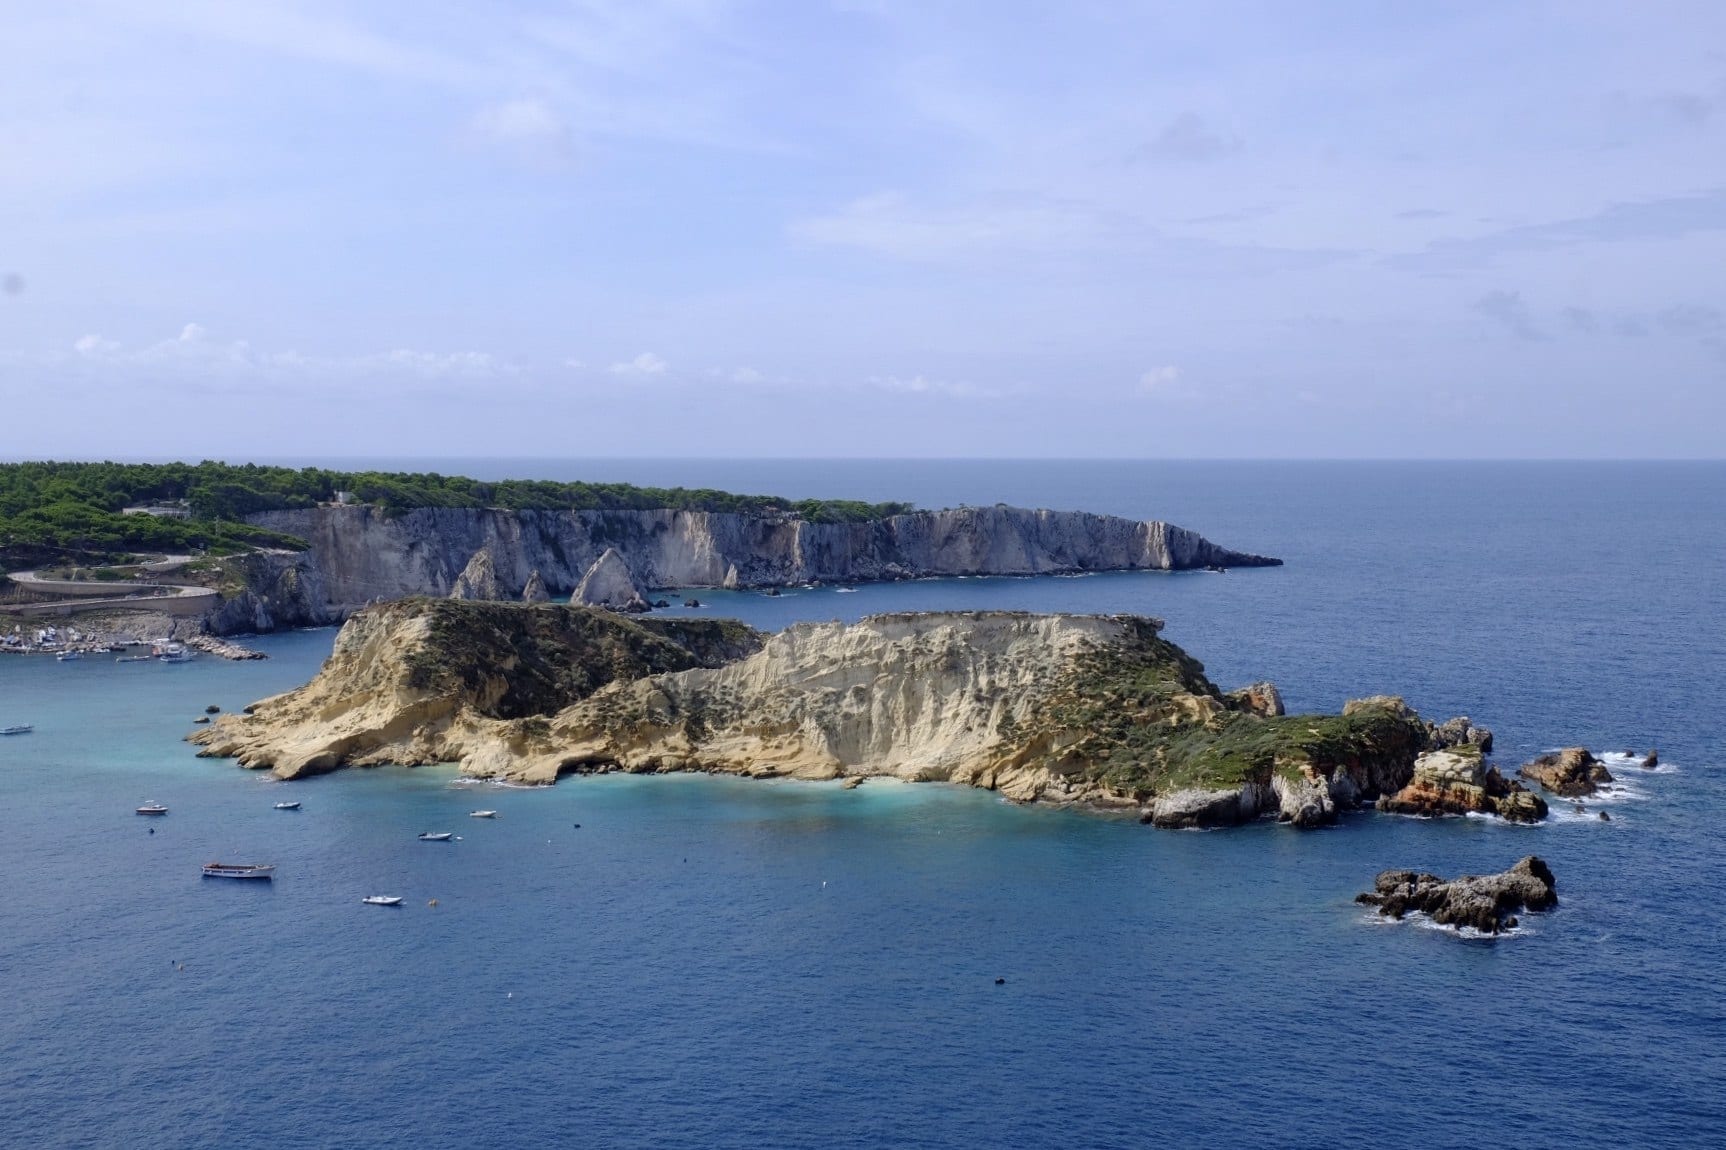 A view over two of the Tremiti Islands -- a rocky, uninhabited island, covered with sand and grass, rising out of the bright blue sea. Rowboats in the water in front of the island.